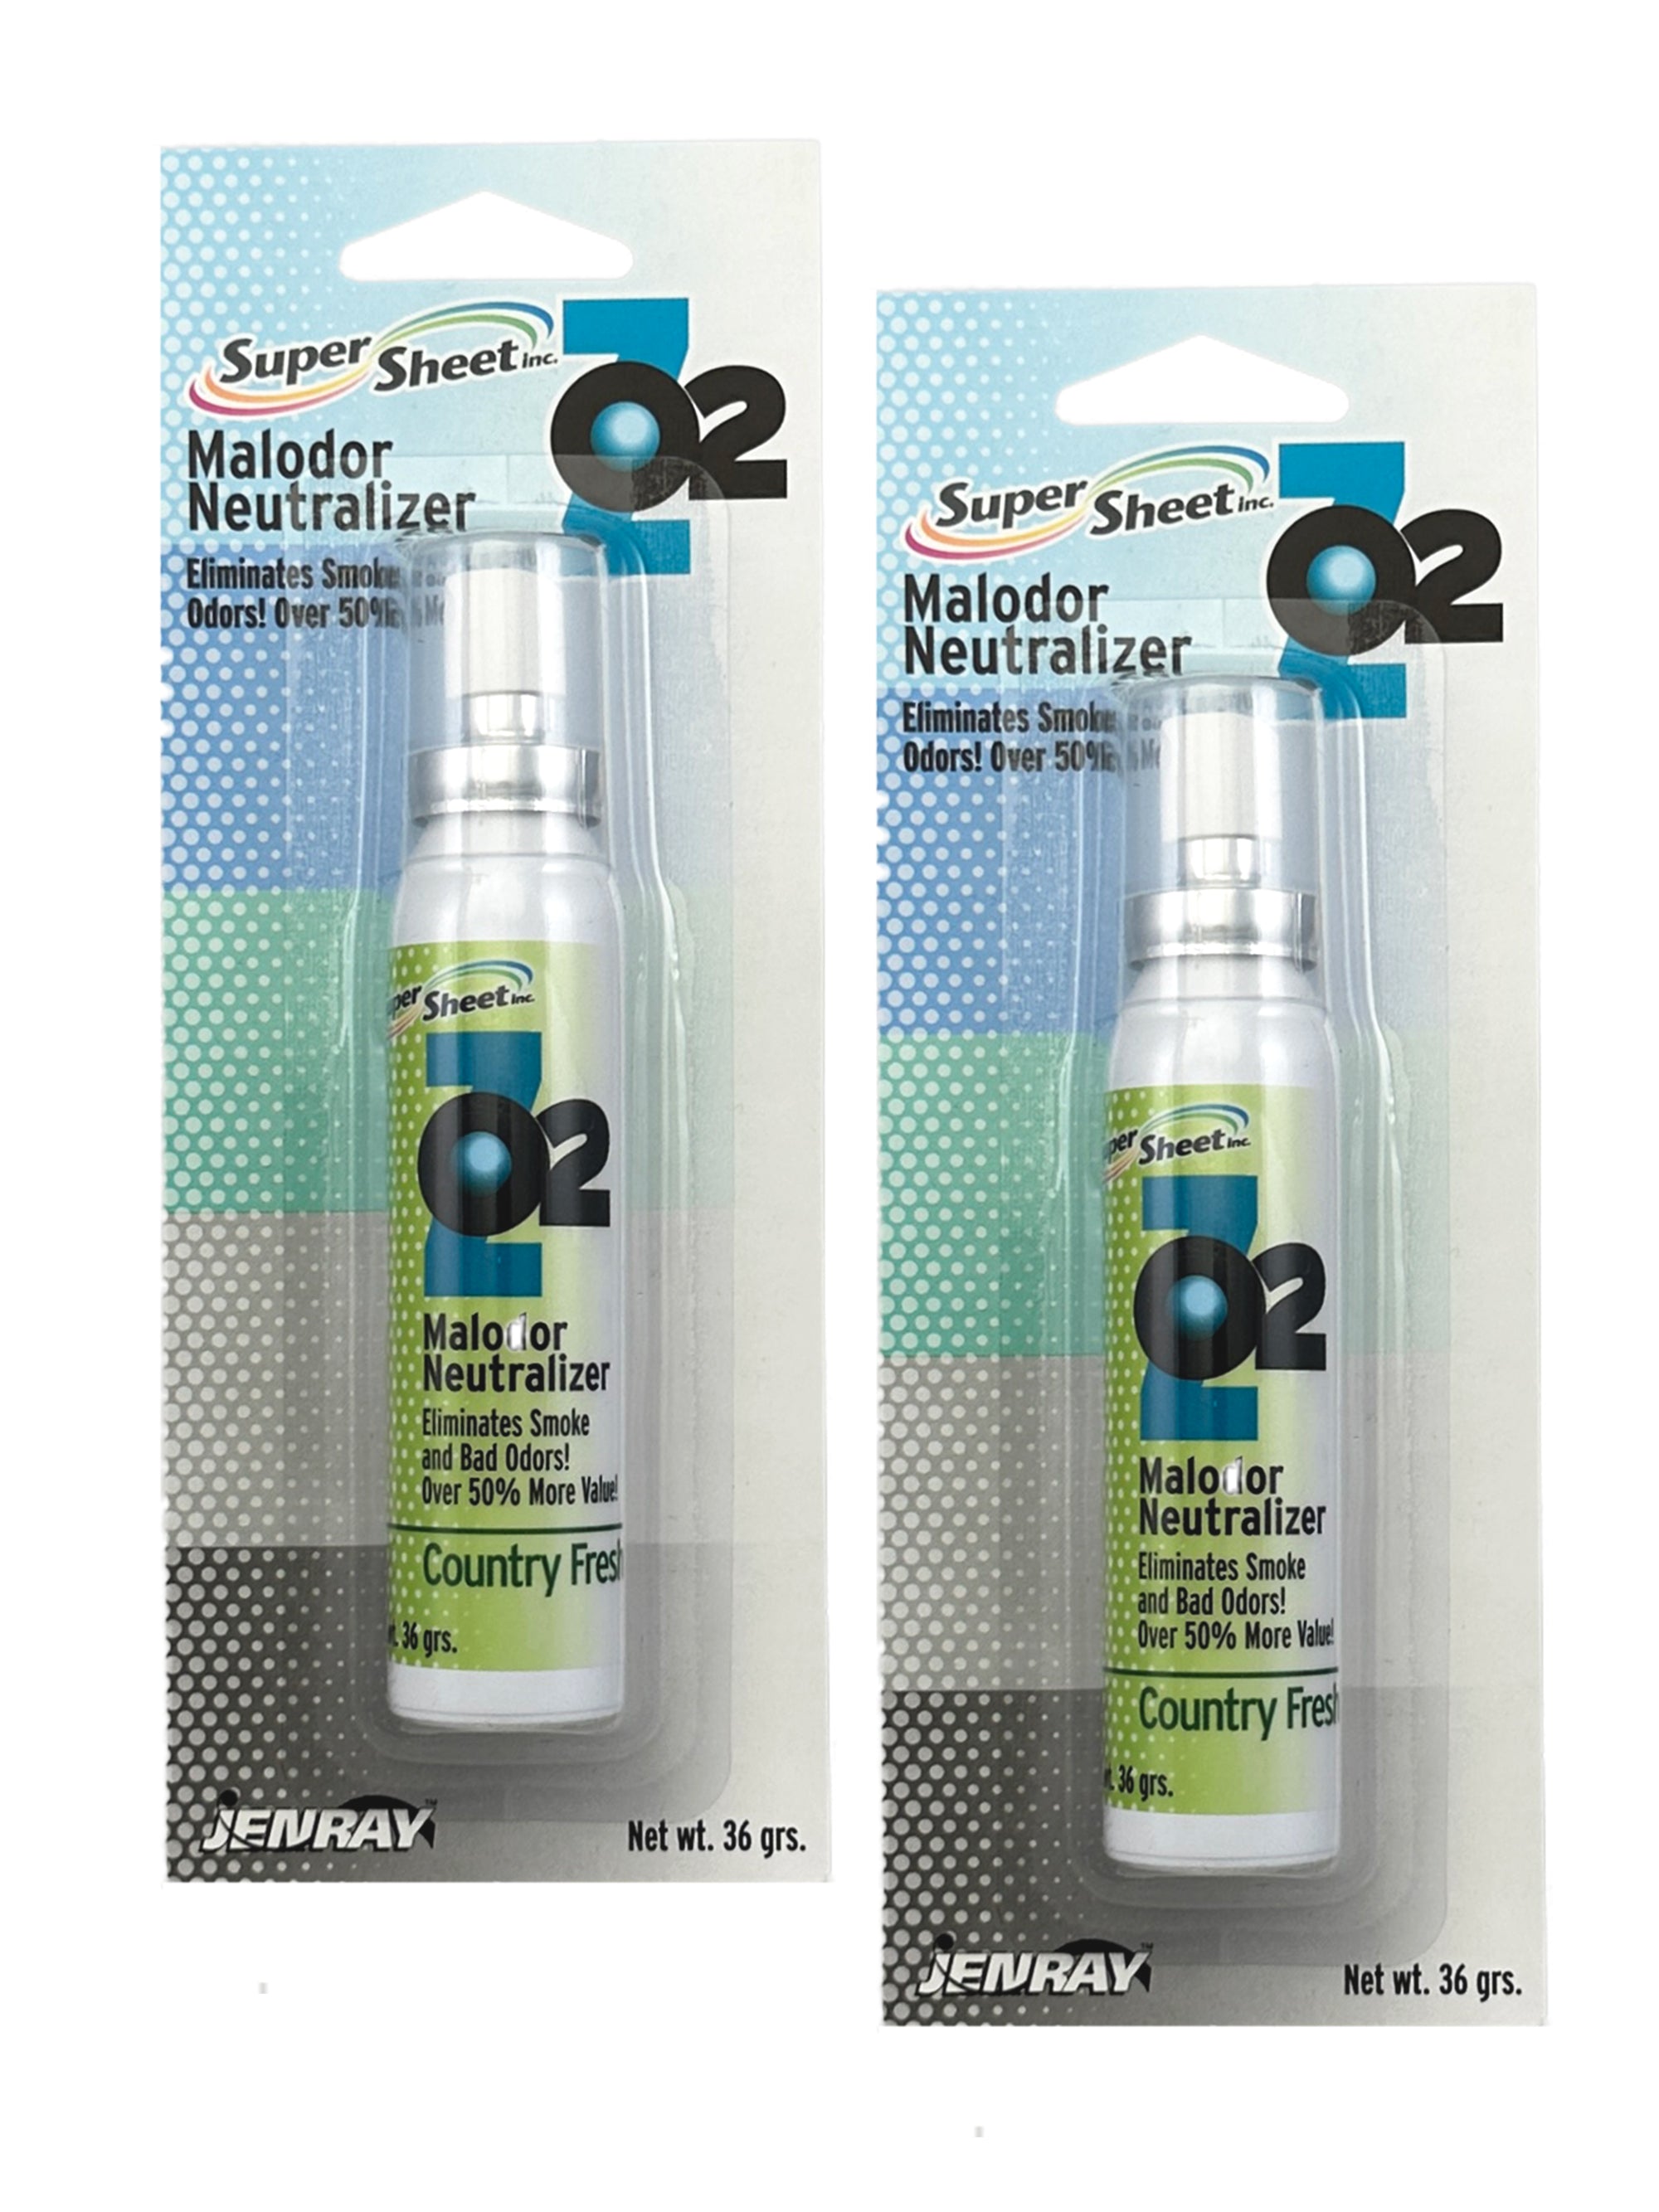 Super Sheet Malodor Neutralizer with Country Fresh Scent: The